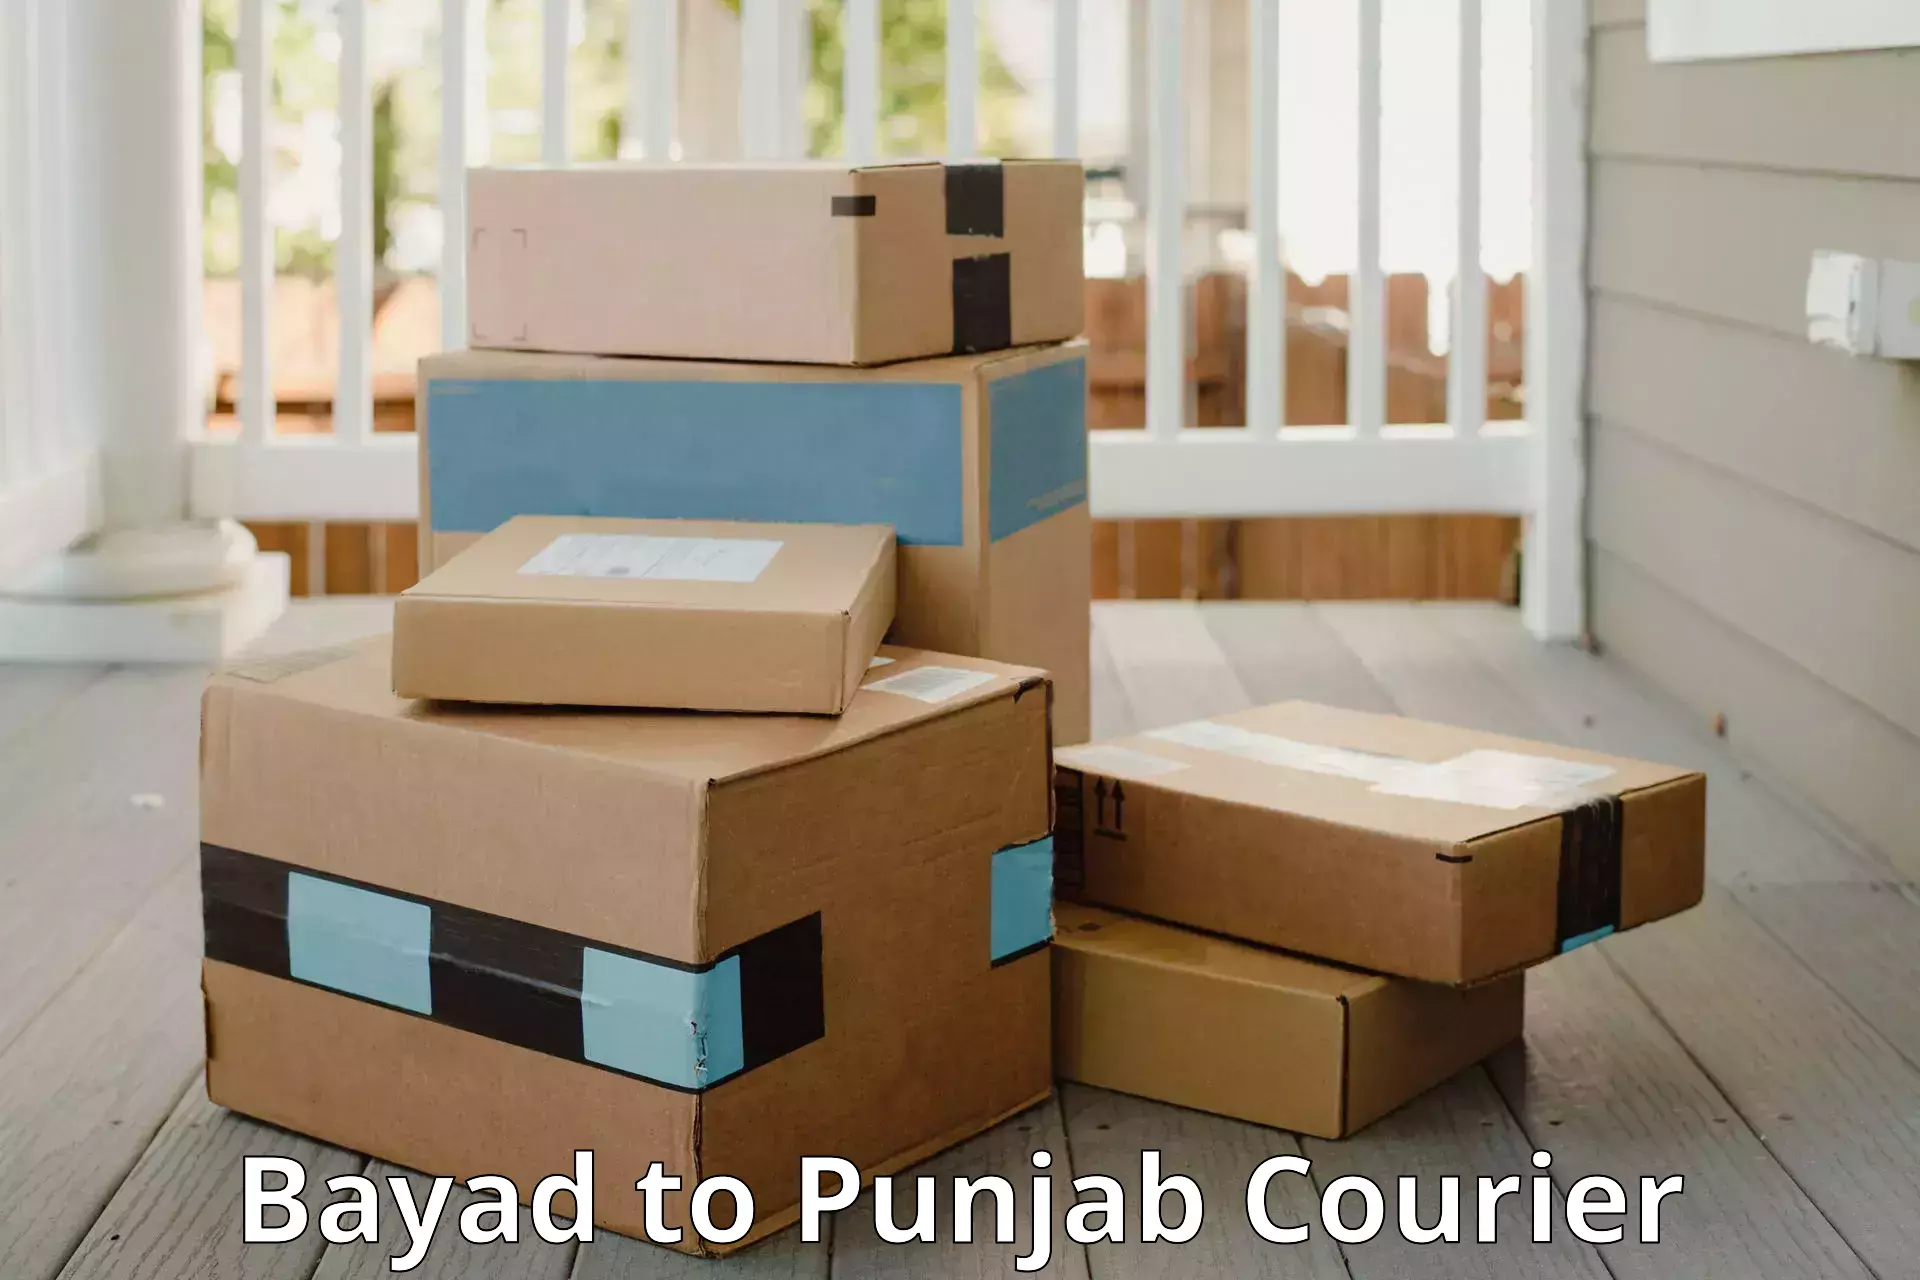 Luggage delivery solutions Bayad to Punjab